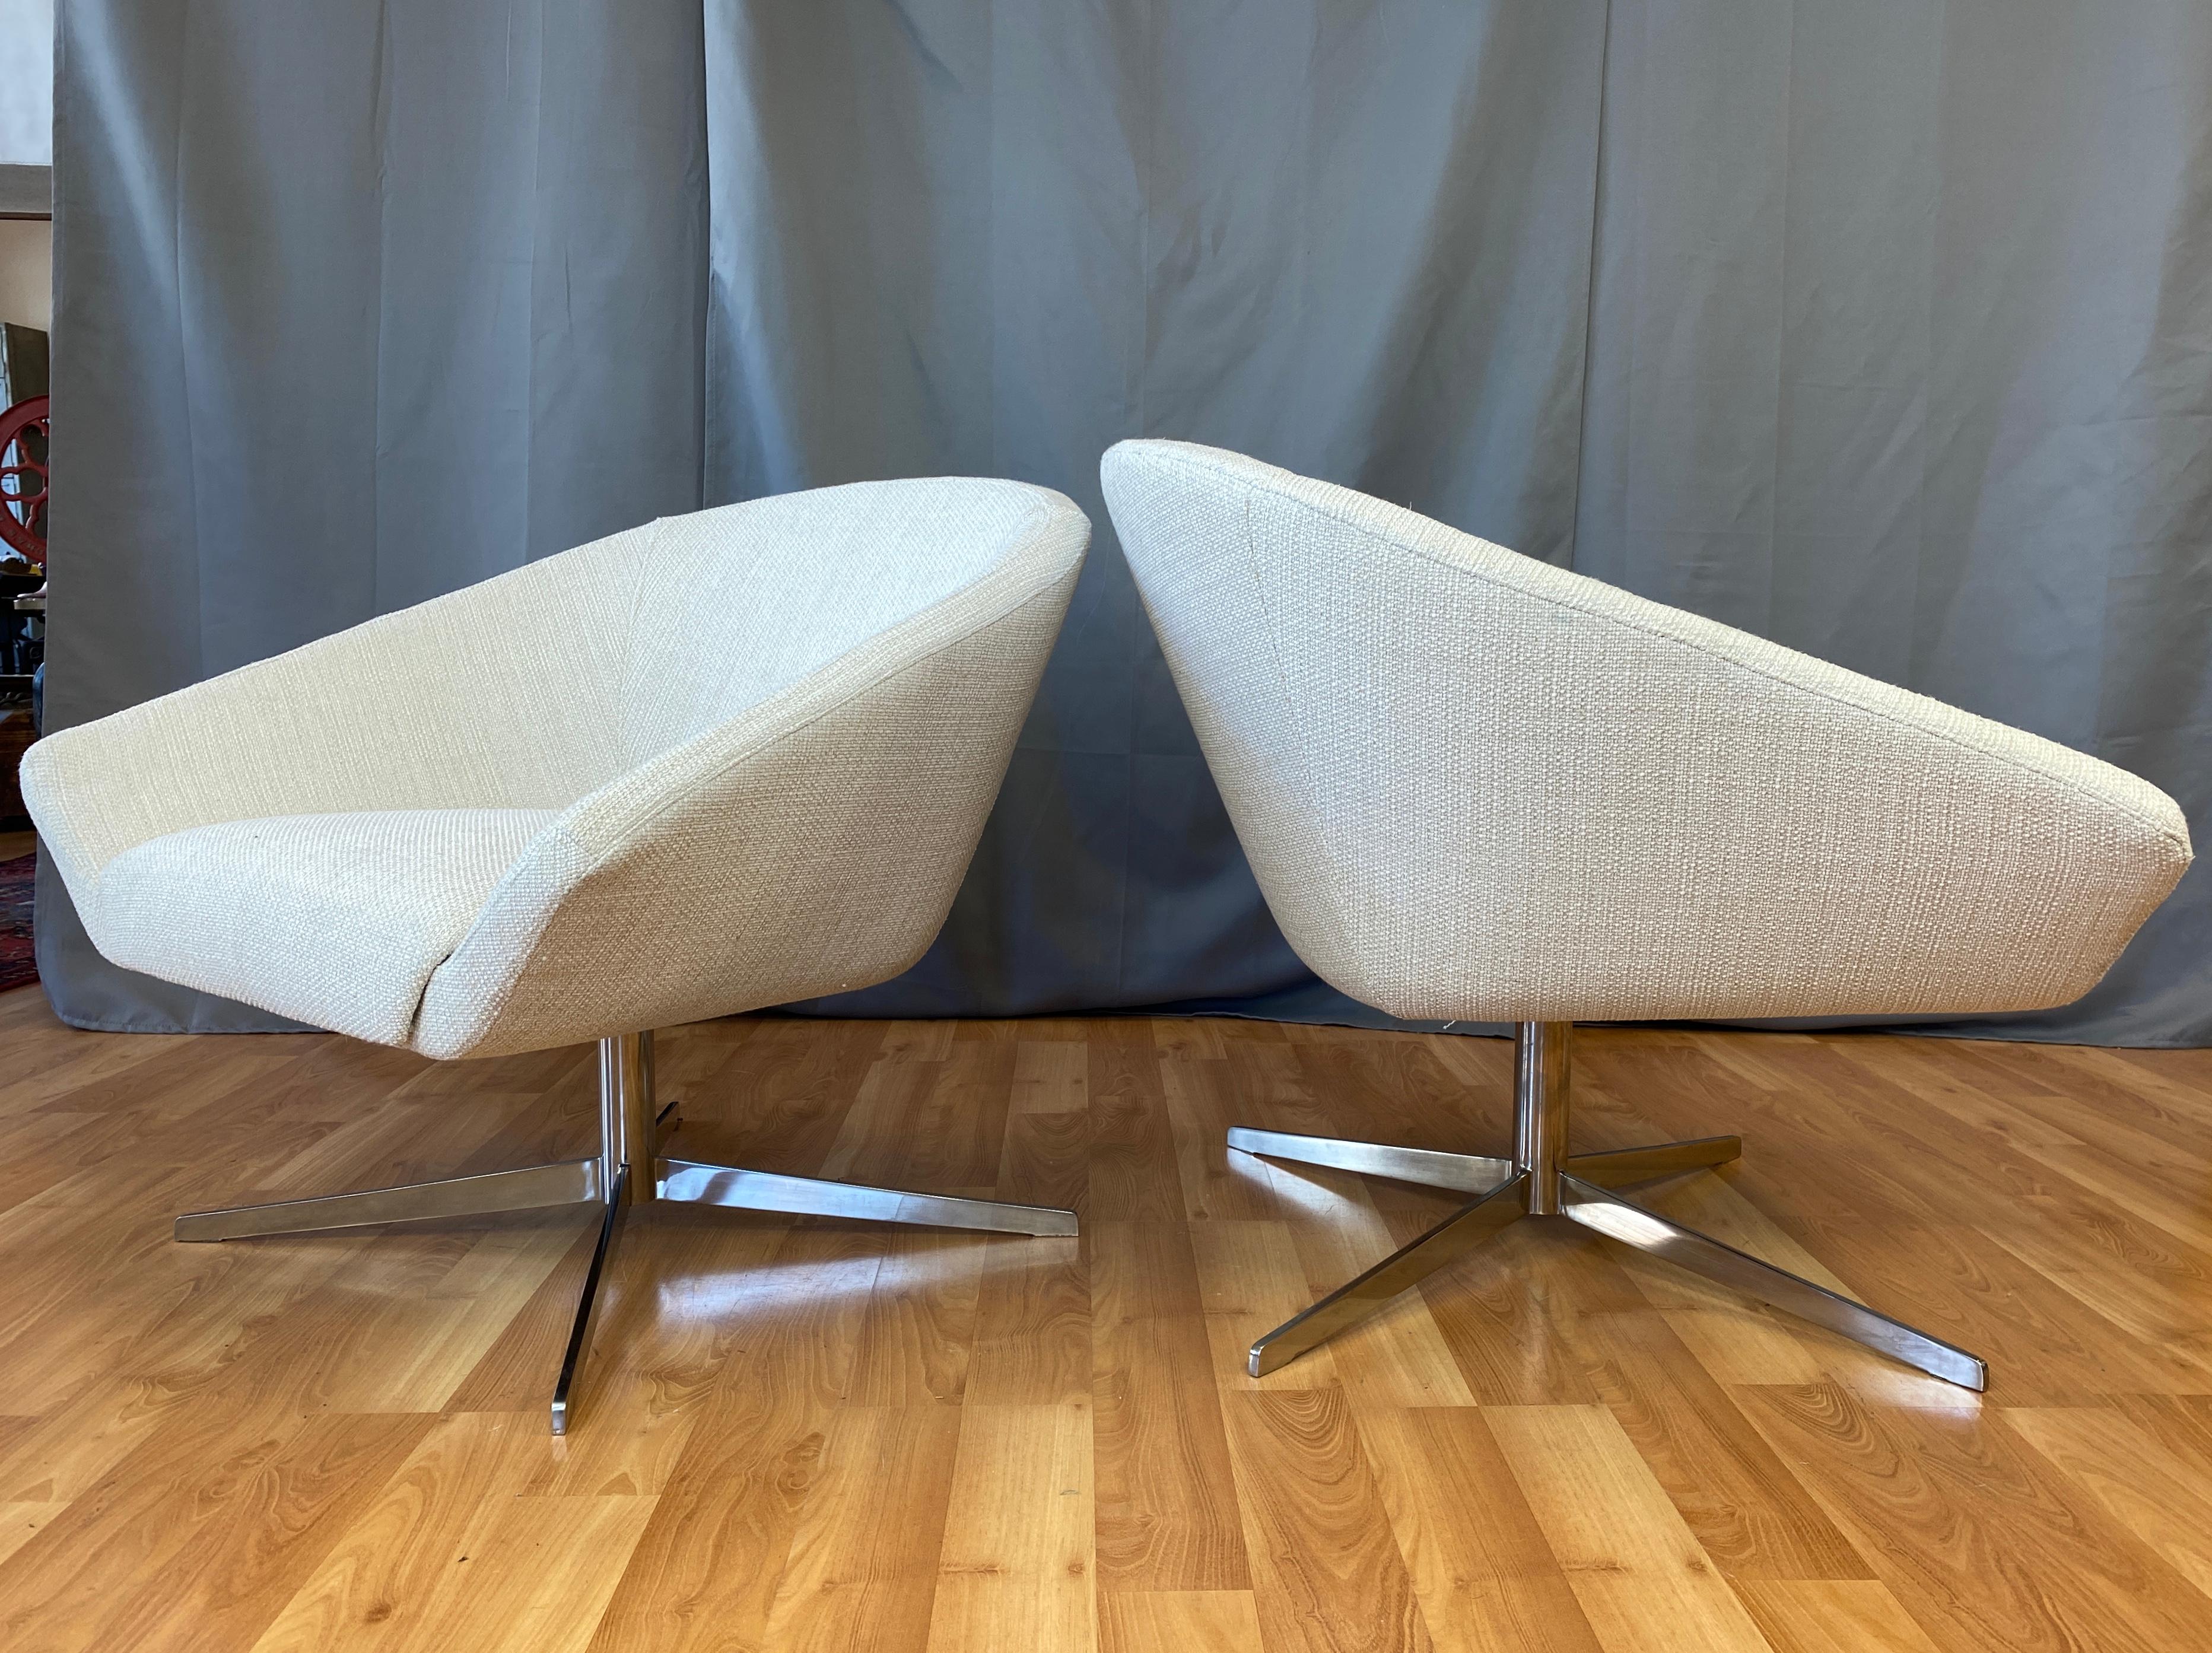 Pair of Remy Lounge Chairs by Jeffrey Bernett for Bernhardt Design 3